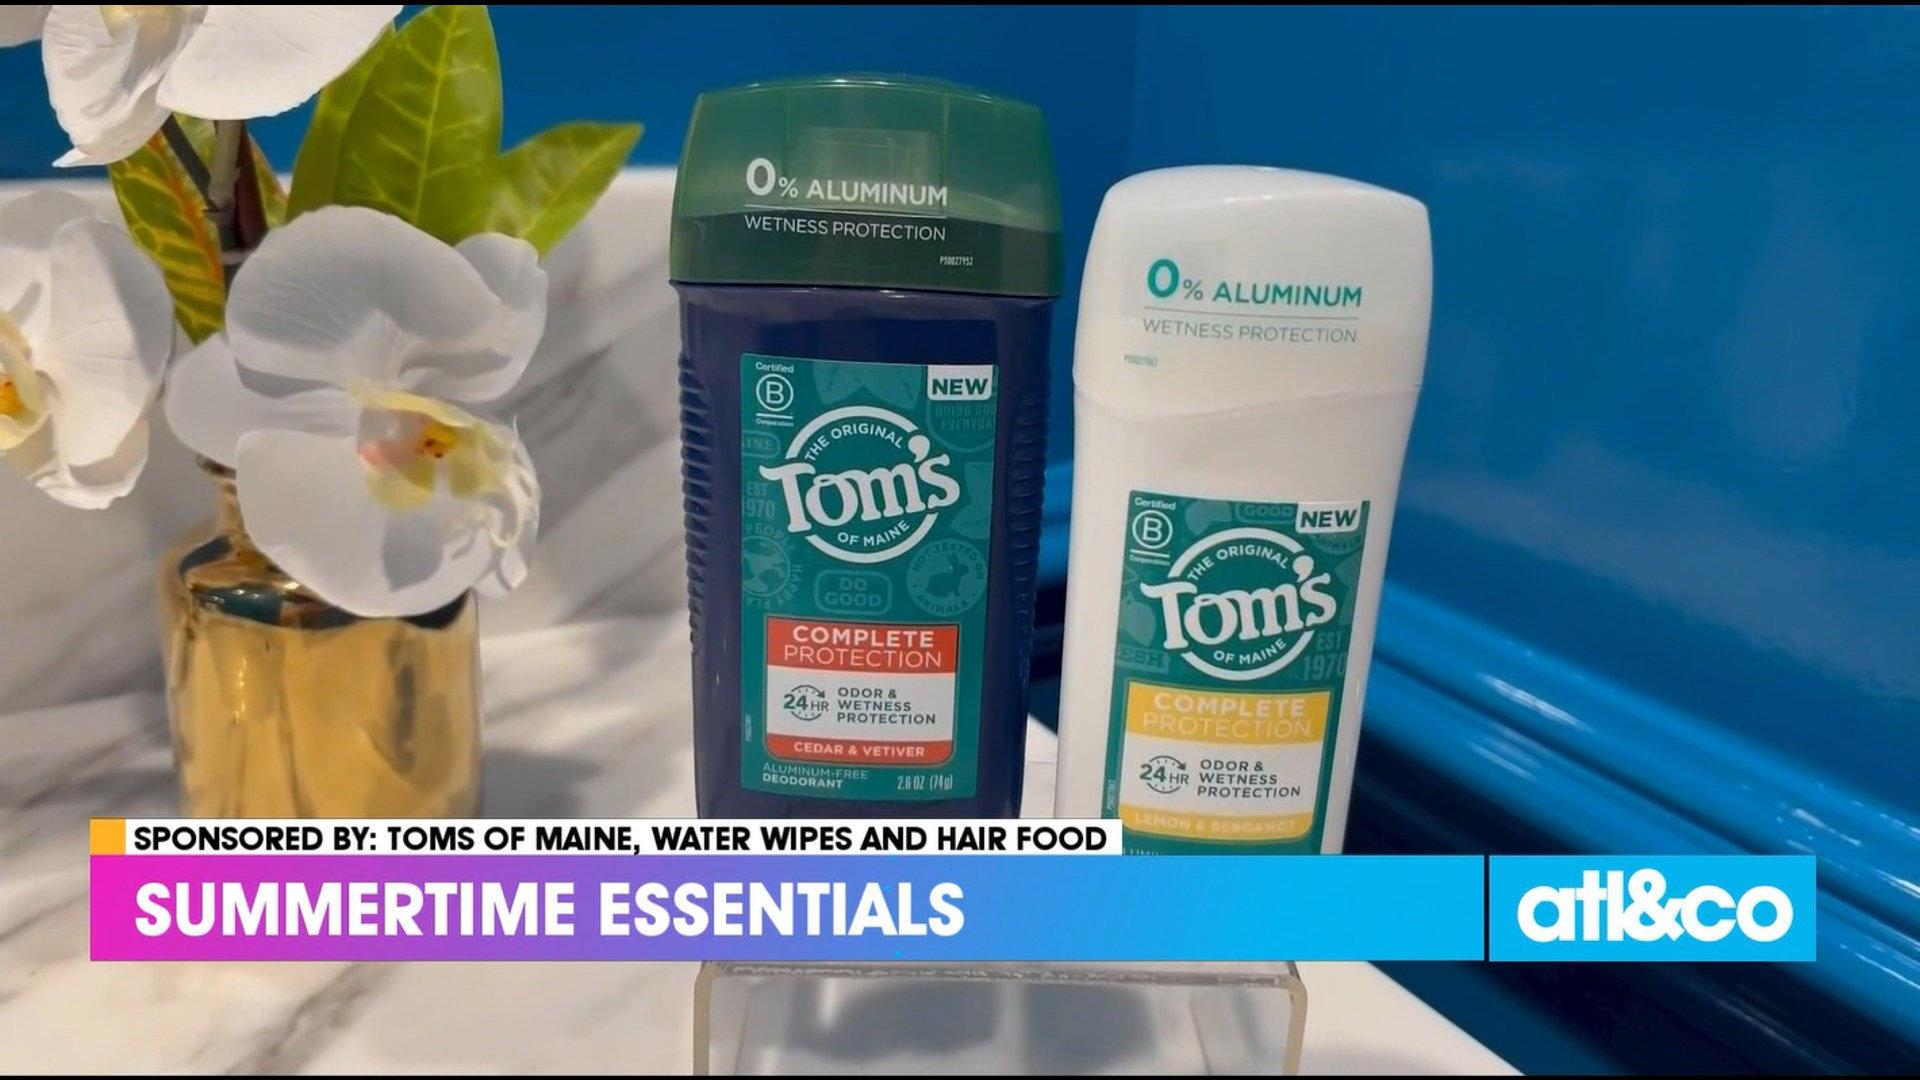 Lifestyle editor Joann Butler shares summer must-haves from Tom's of Maine, Water Wipes, and Hair Food.